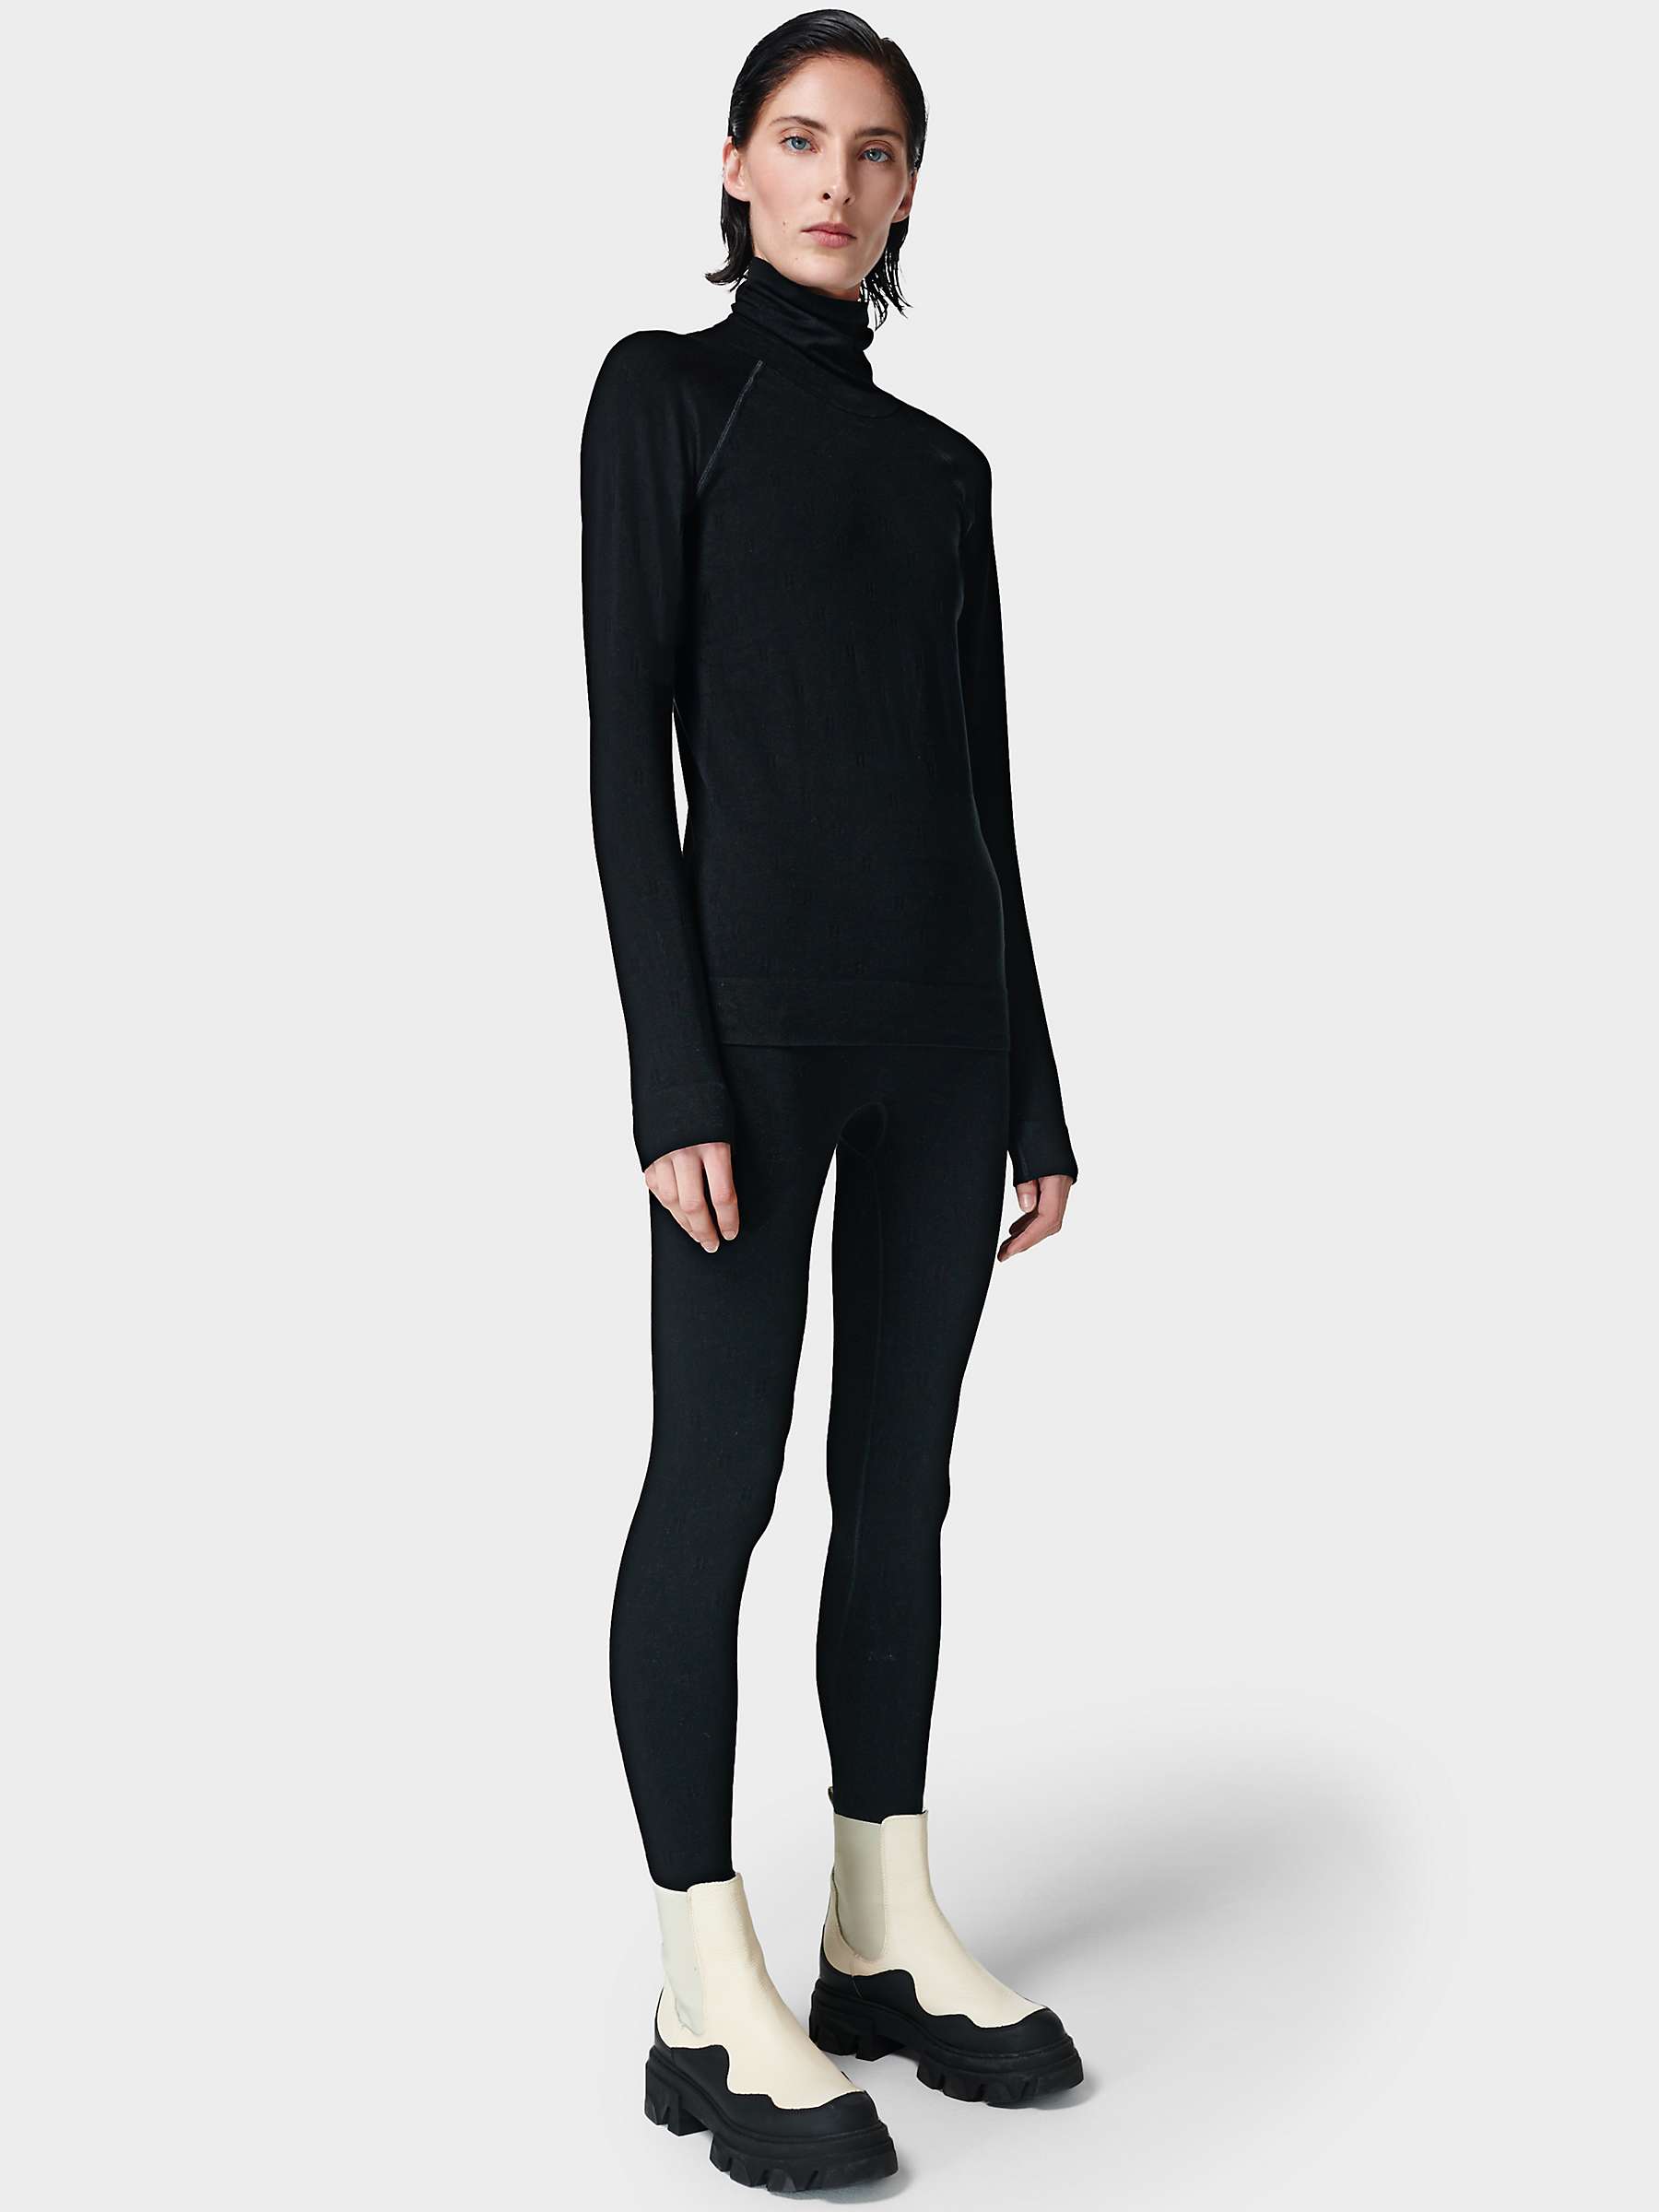 Buy Sweaty Betty Funnel Neck Base Layer Top, Black Online at johnlewis.com